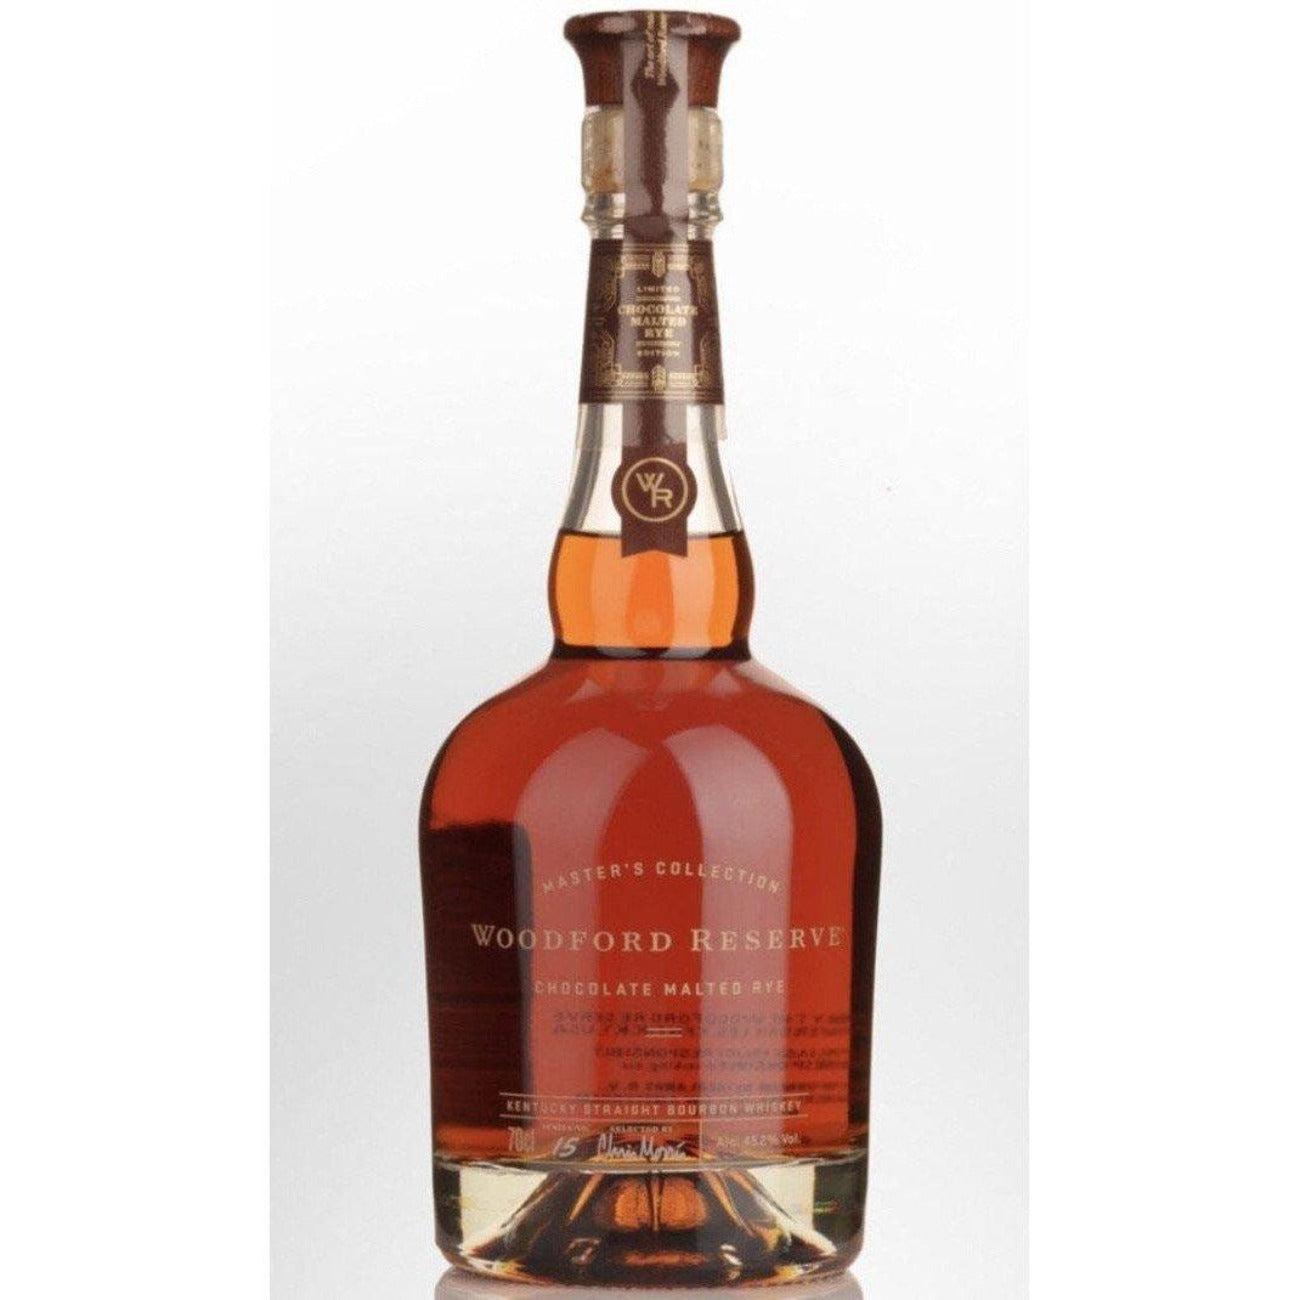 Woodford Reserve | Masters Collection Chocolate Malted Rye - TOPBOURBON